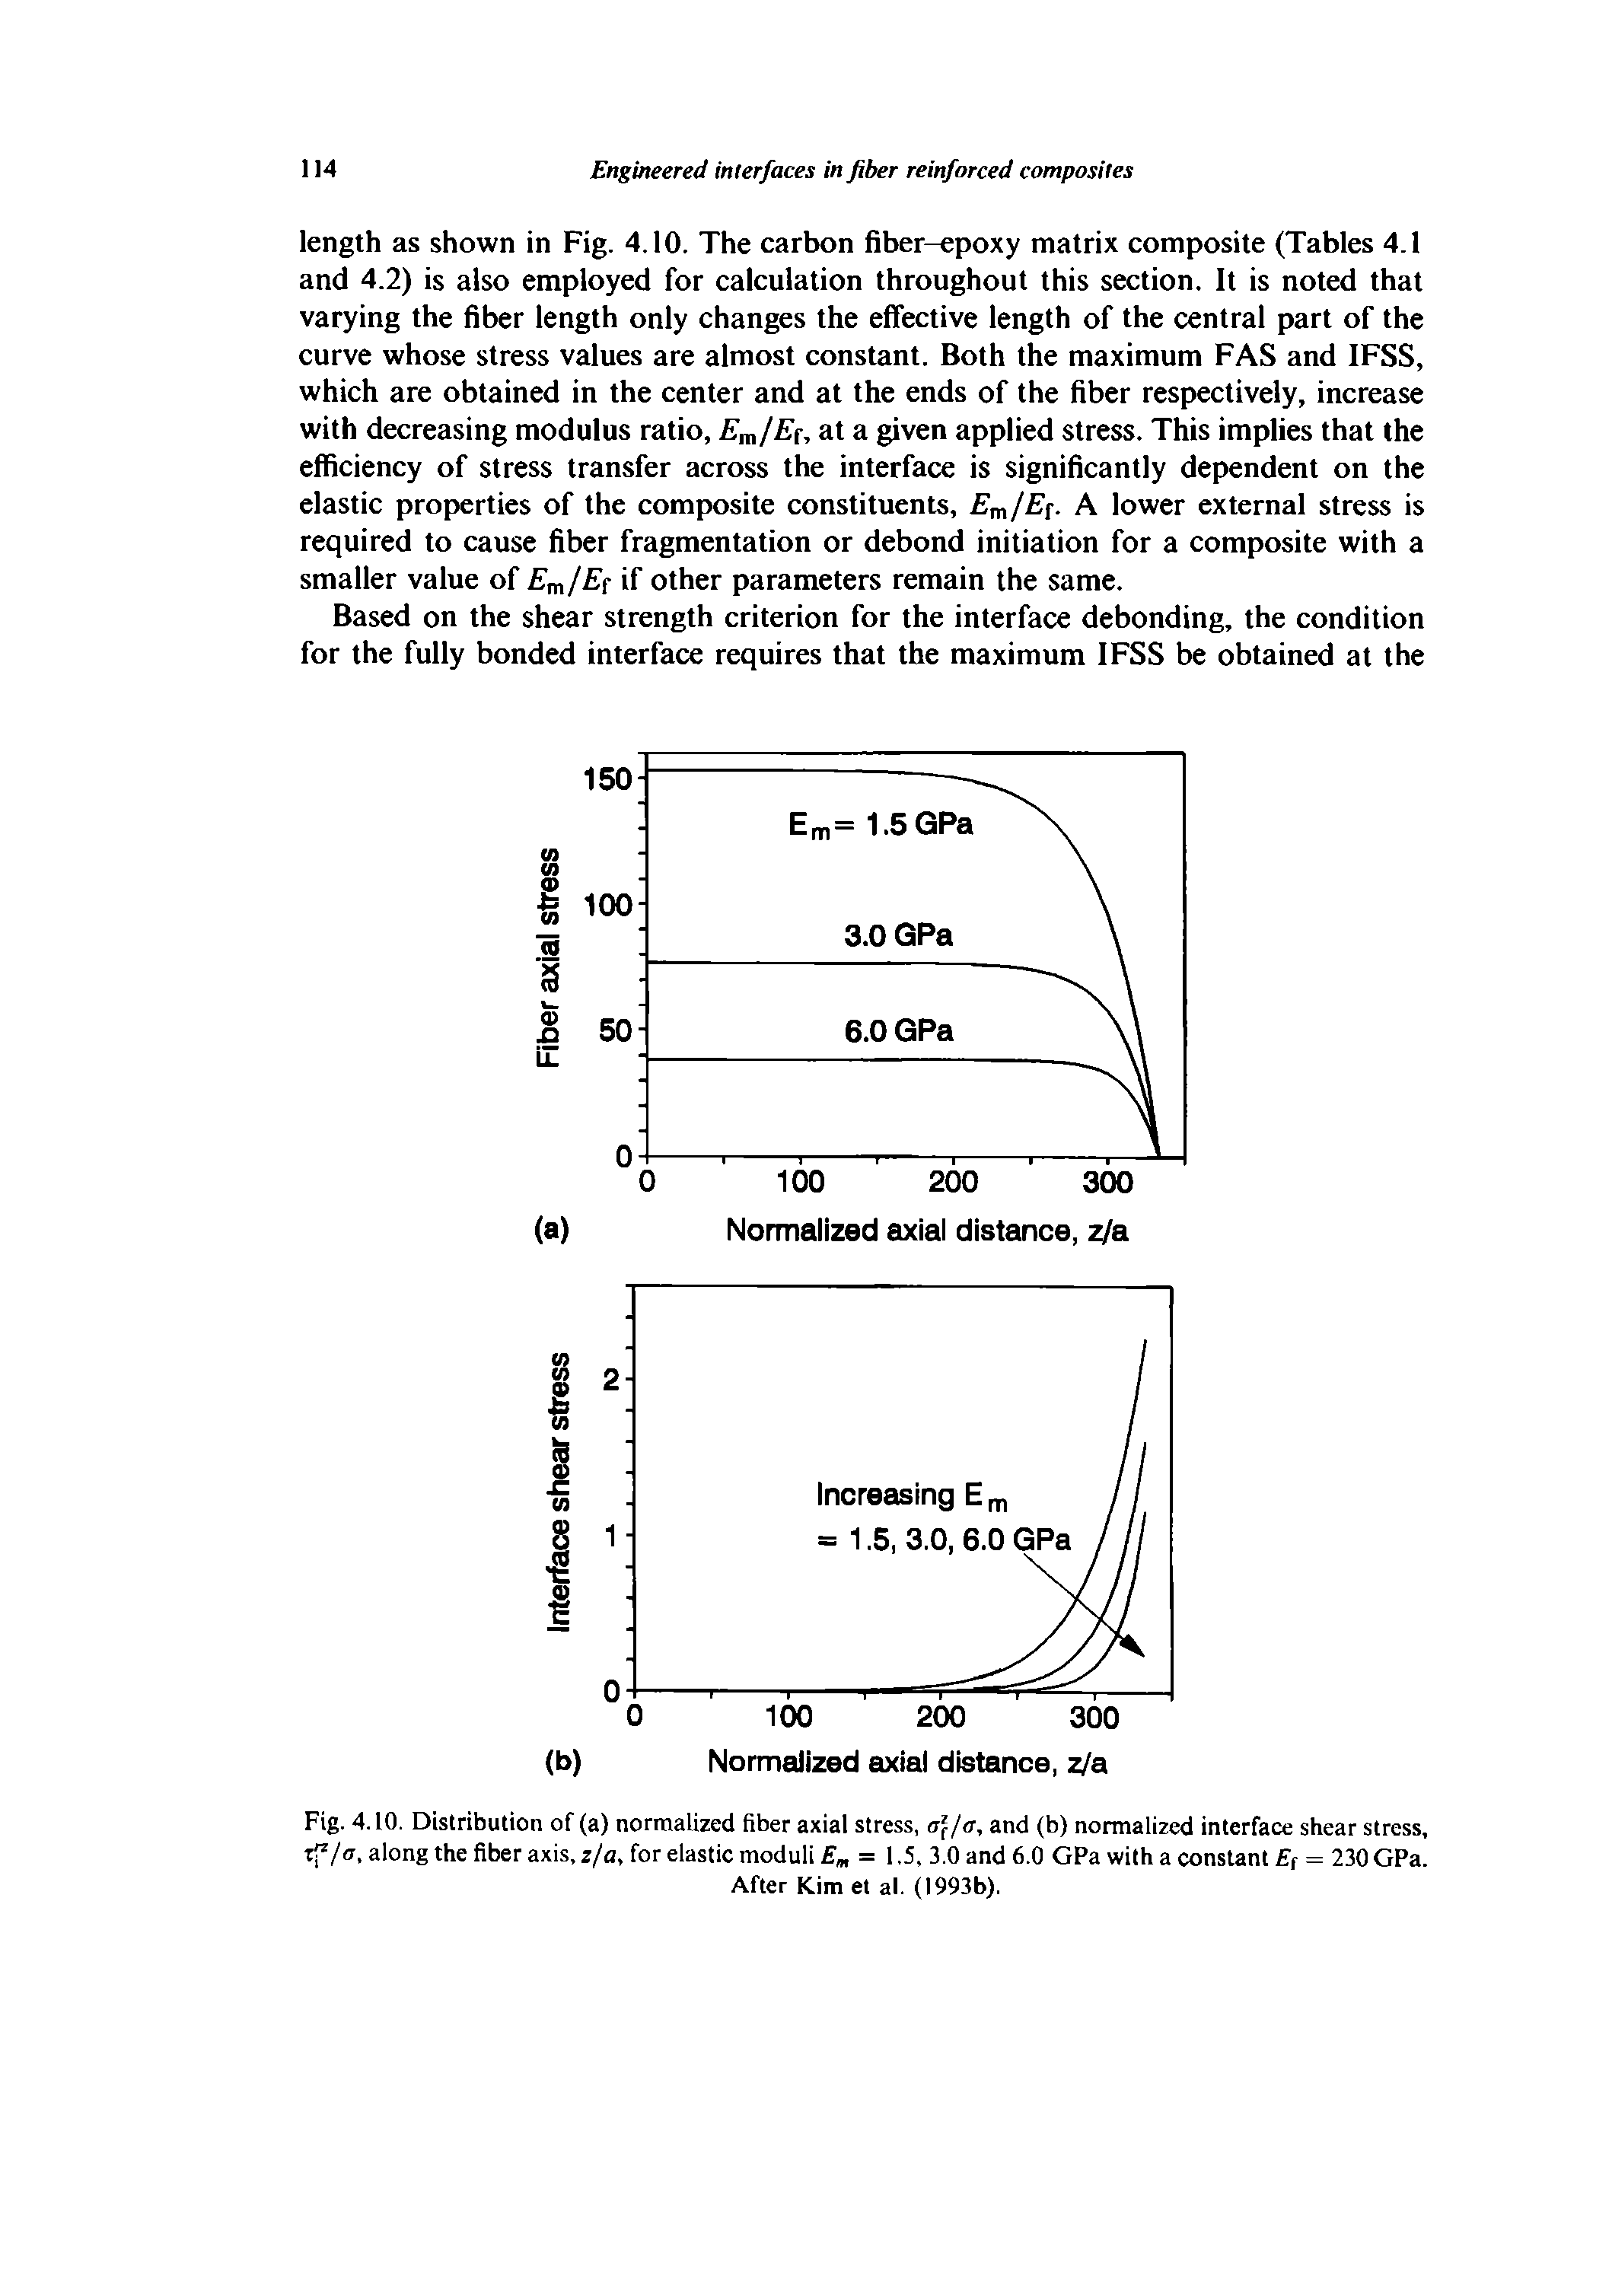 Fig. 4.10. Distribution of (a) normalized fiber axial stress, a)/a, and (b) normalized interface shear stress, along the fiber axis, r/a, for elastic moduli E = 1,5. 3.0 and 6.0 GPa with a constant f = 230 GPa.